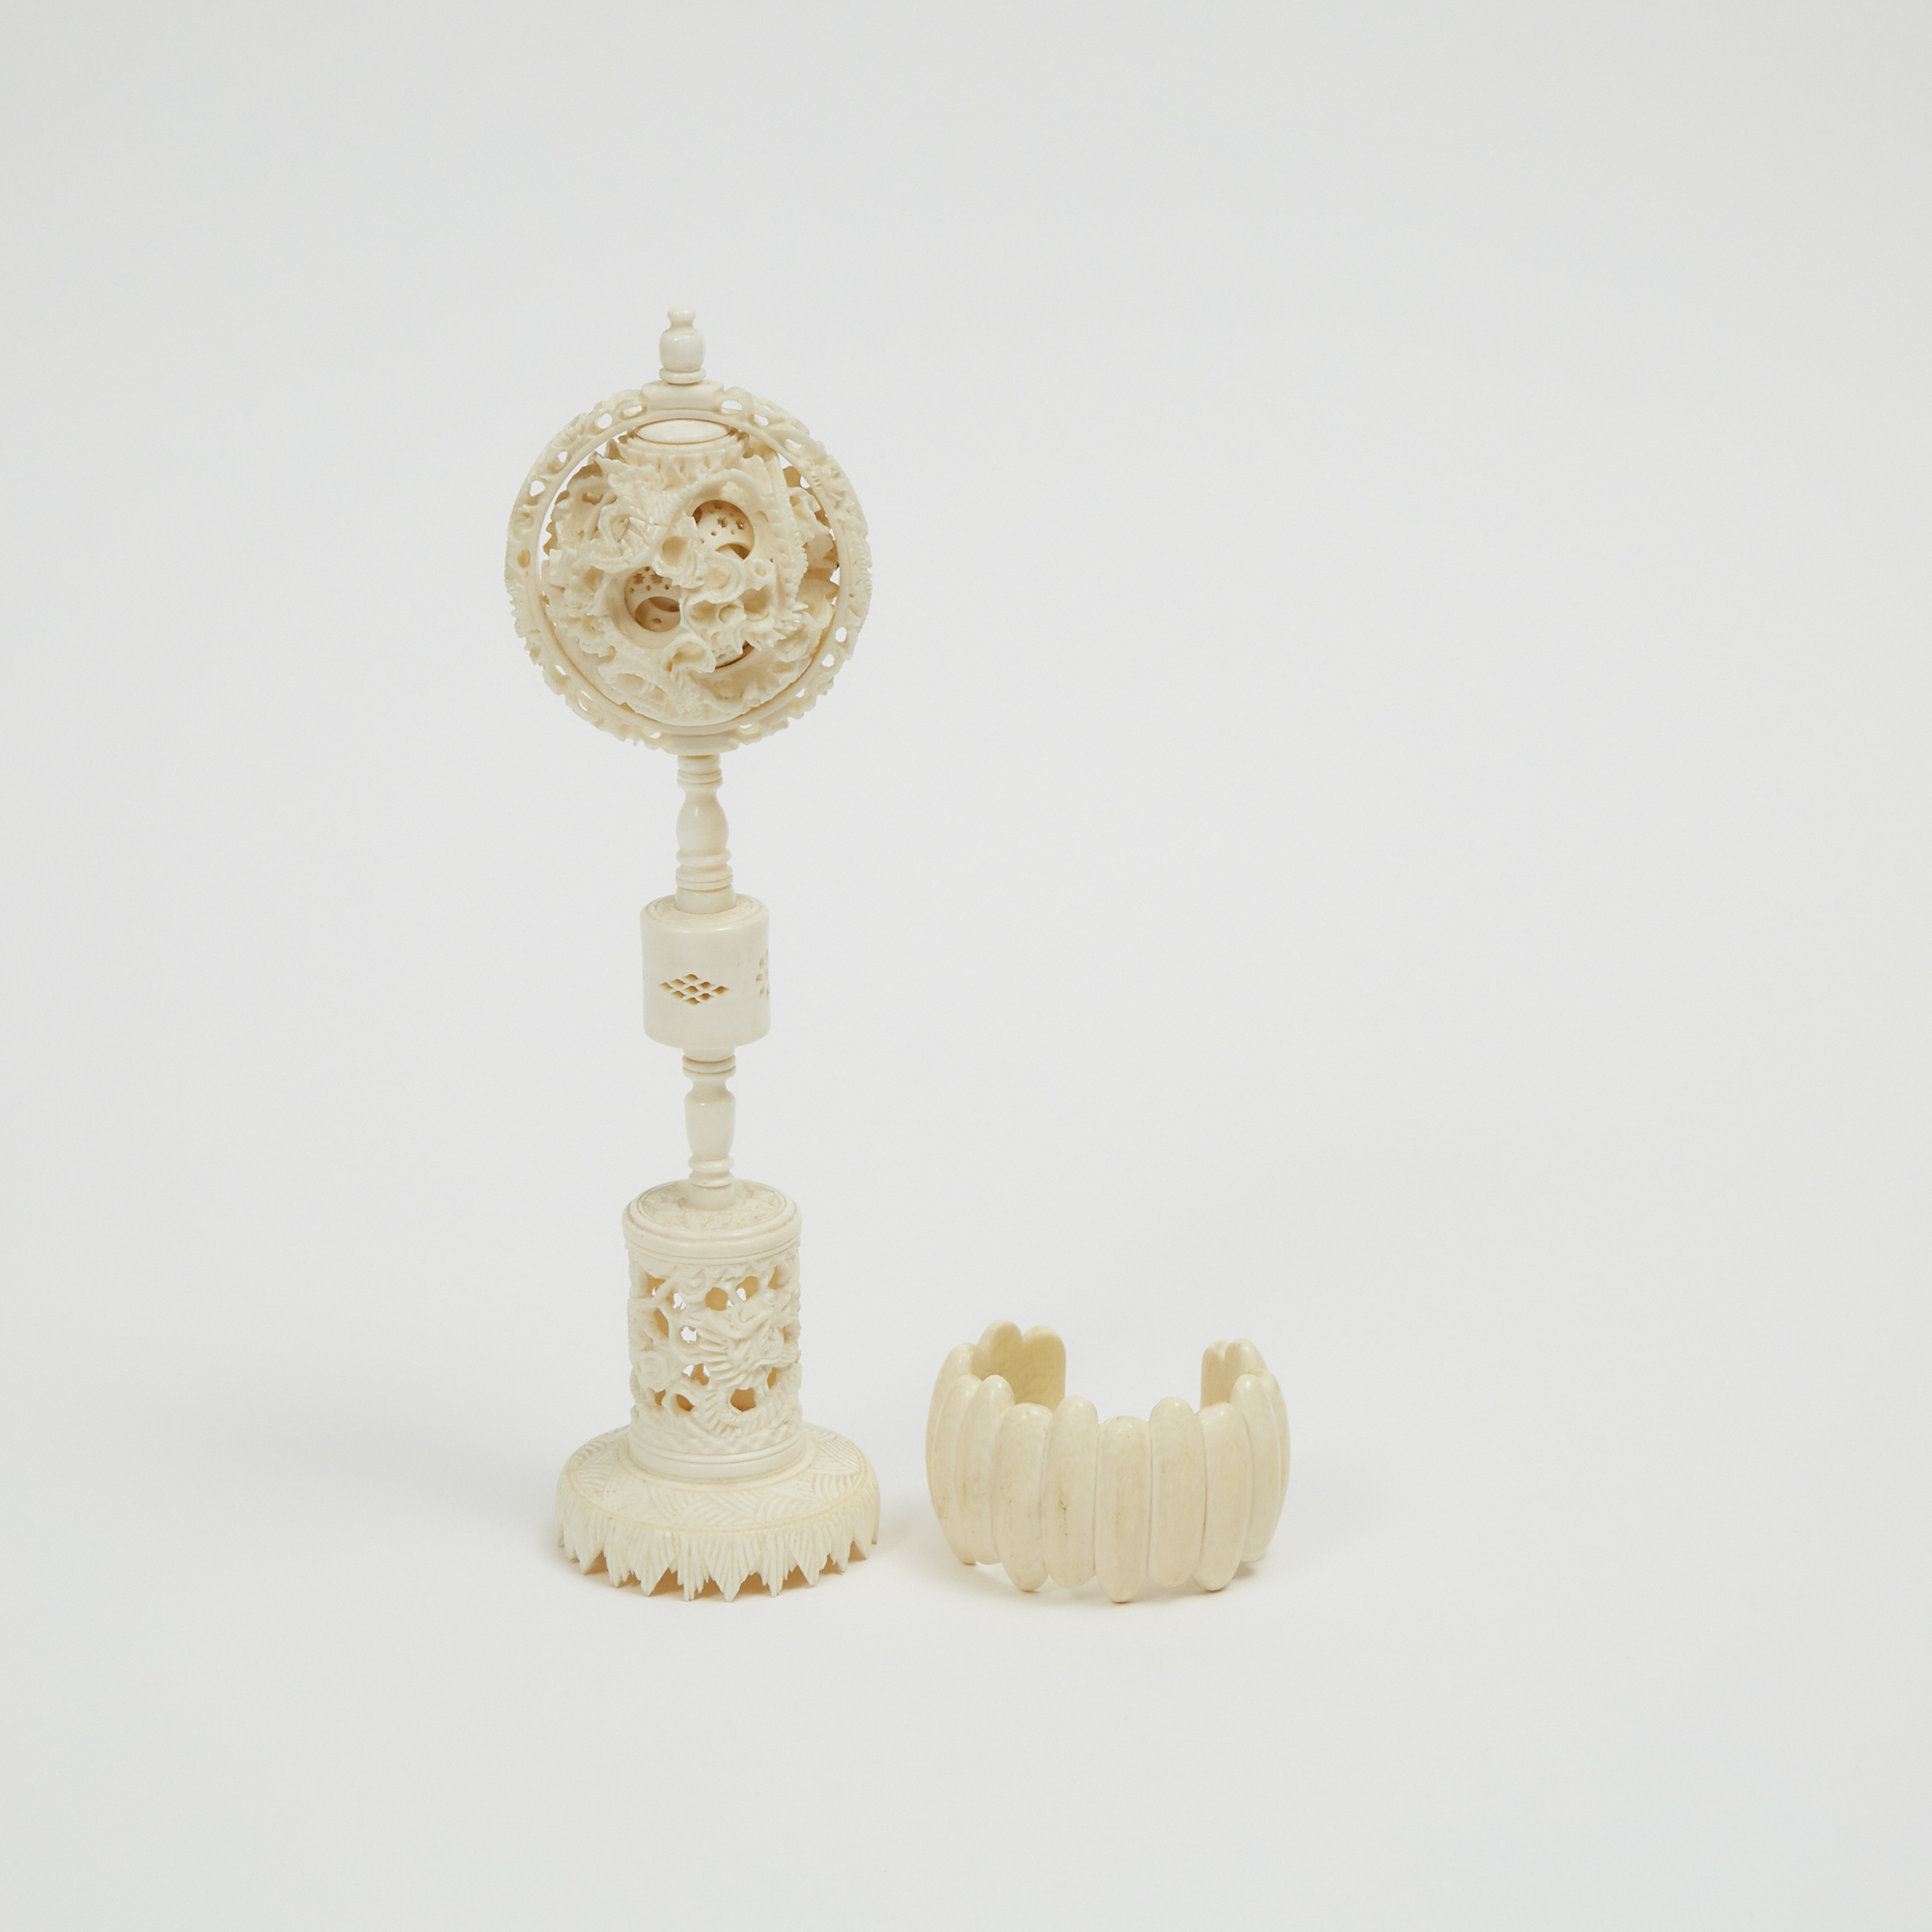 An Ivory Puzzle Ball and Bracelet